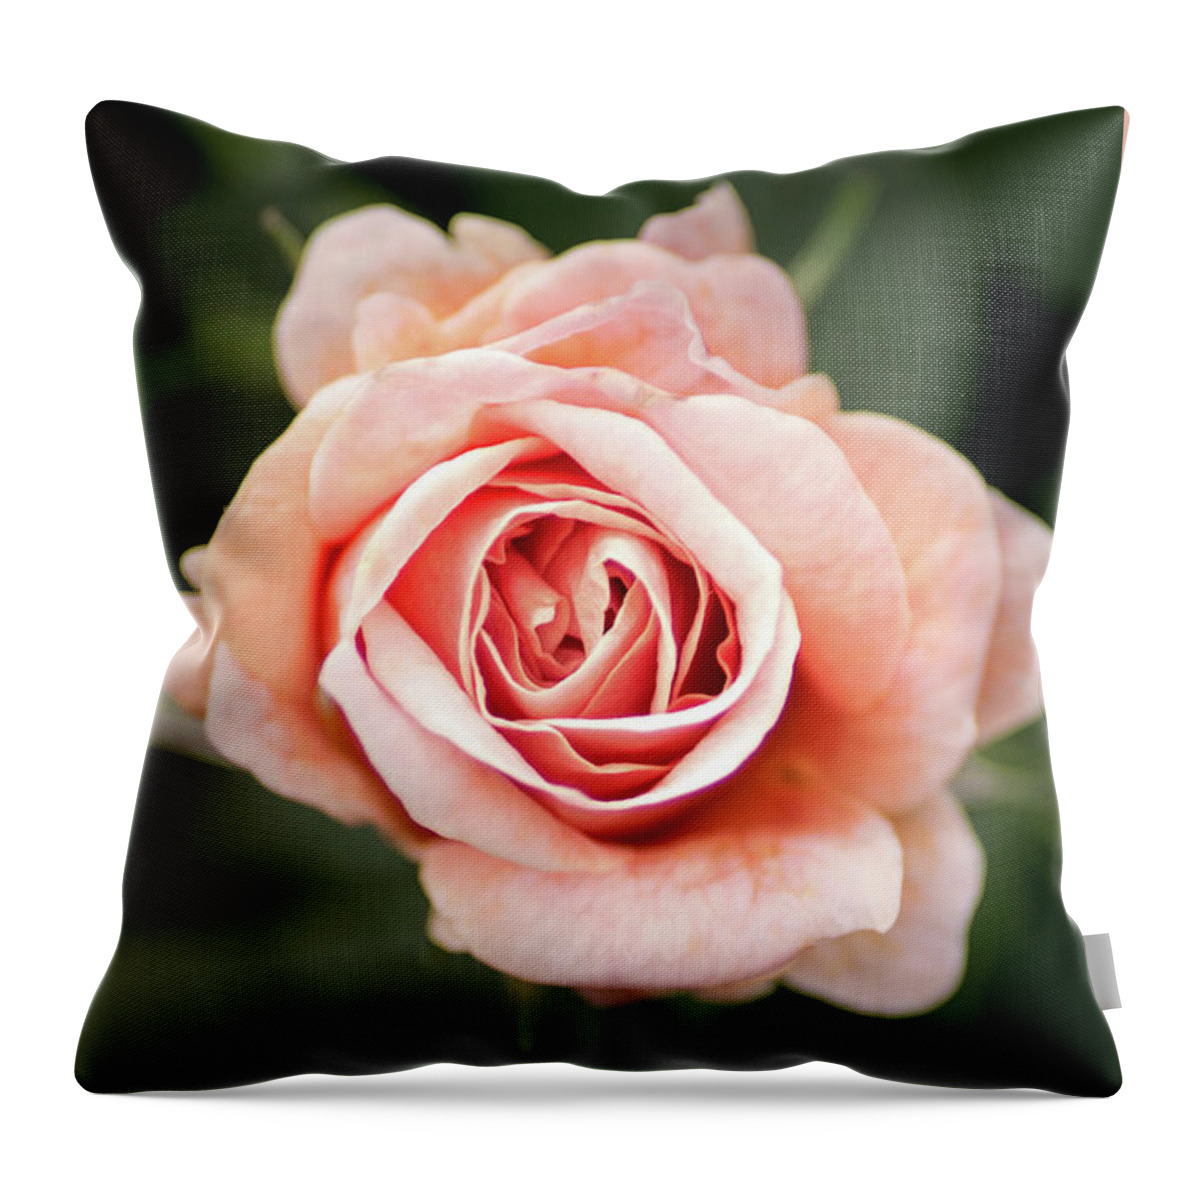 Flower Throw Pillow featuring the photograph Small Pink Rose by Don Johnson